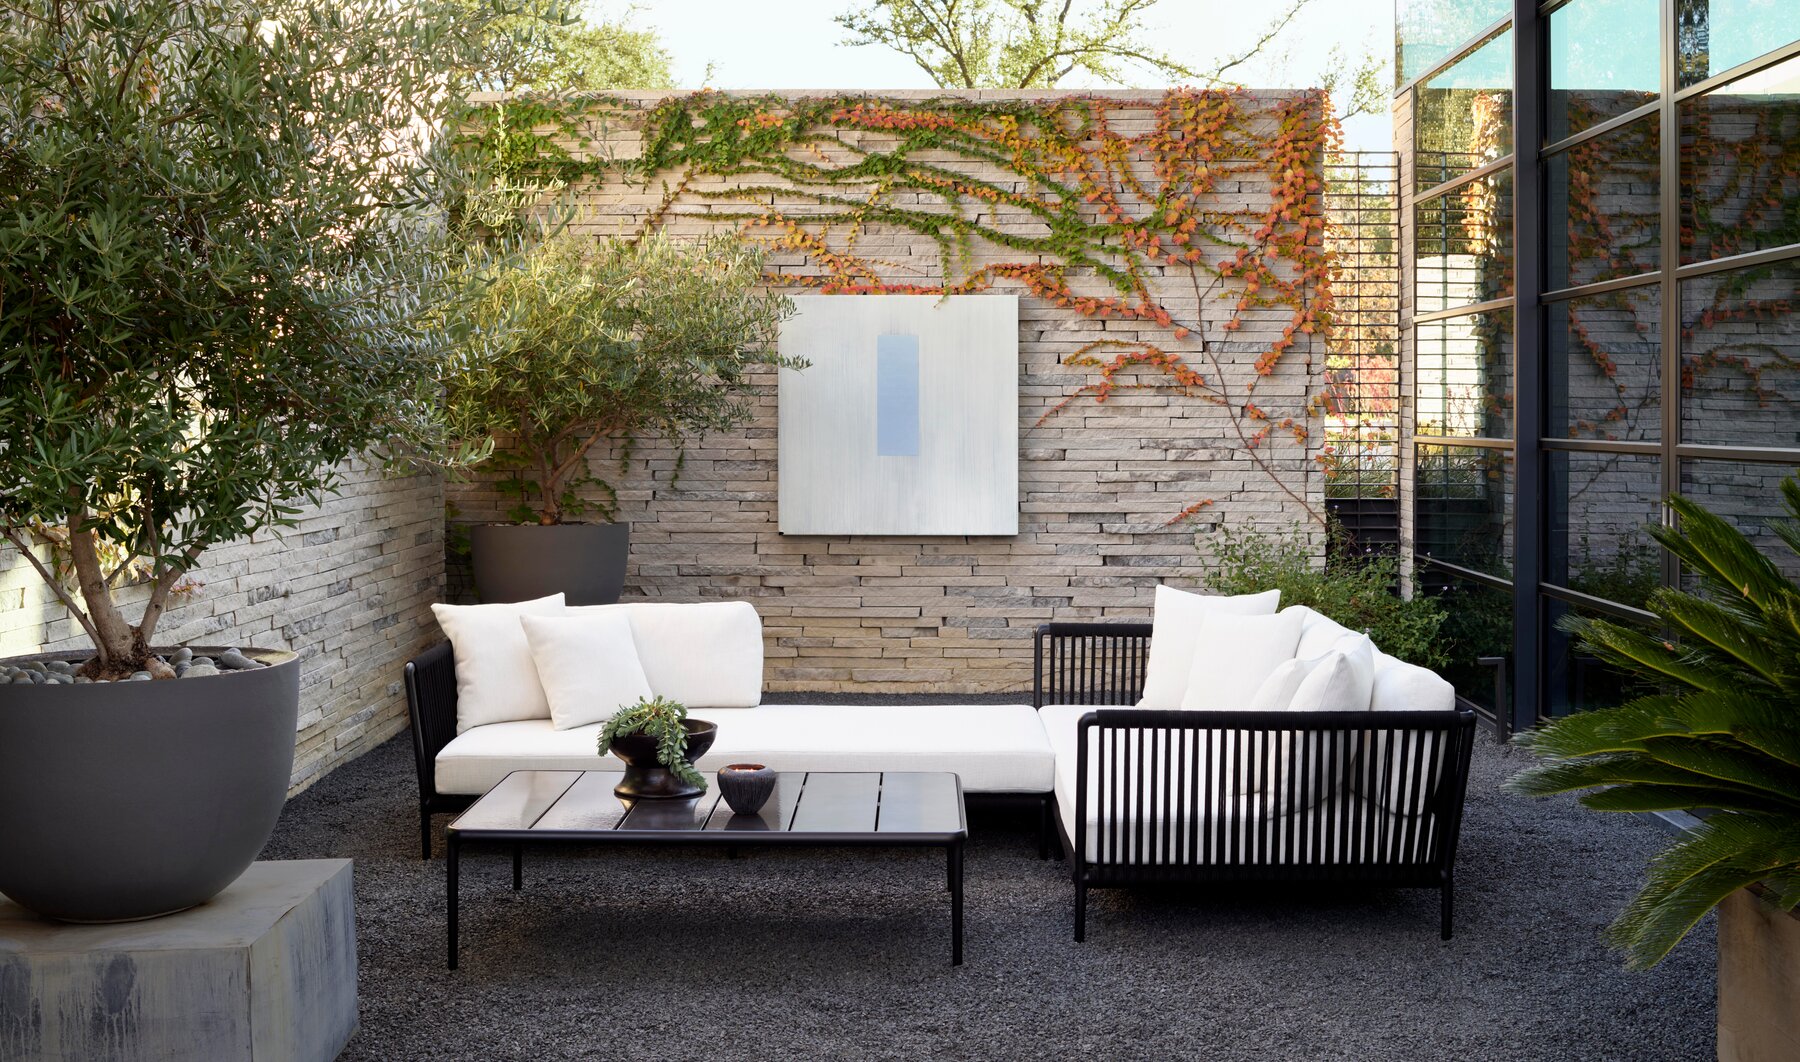 Choose the outdoor furniture